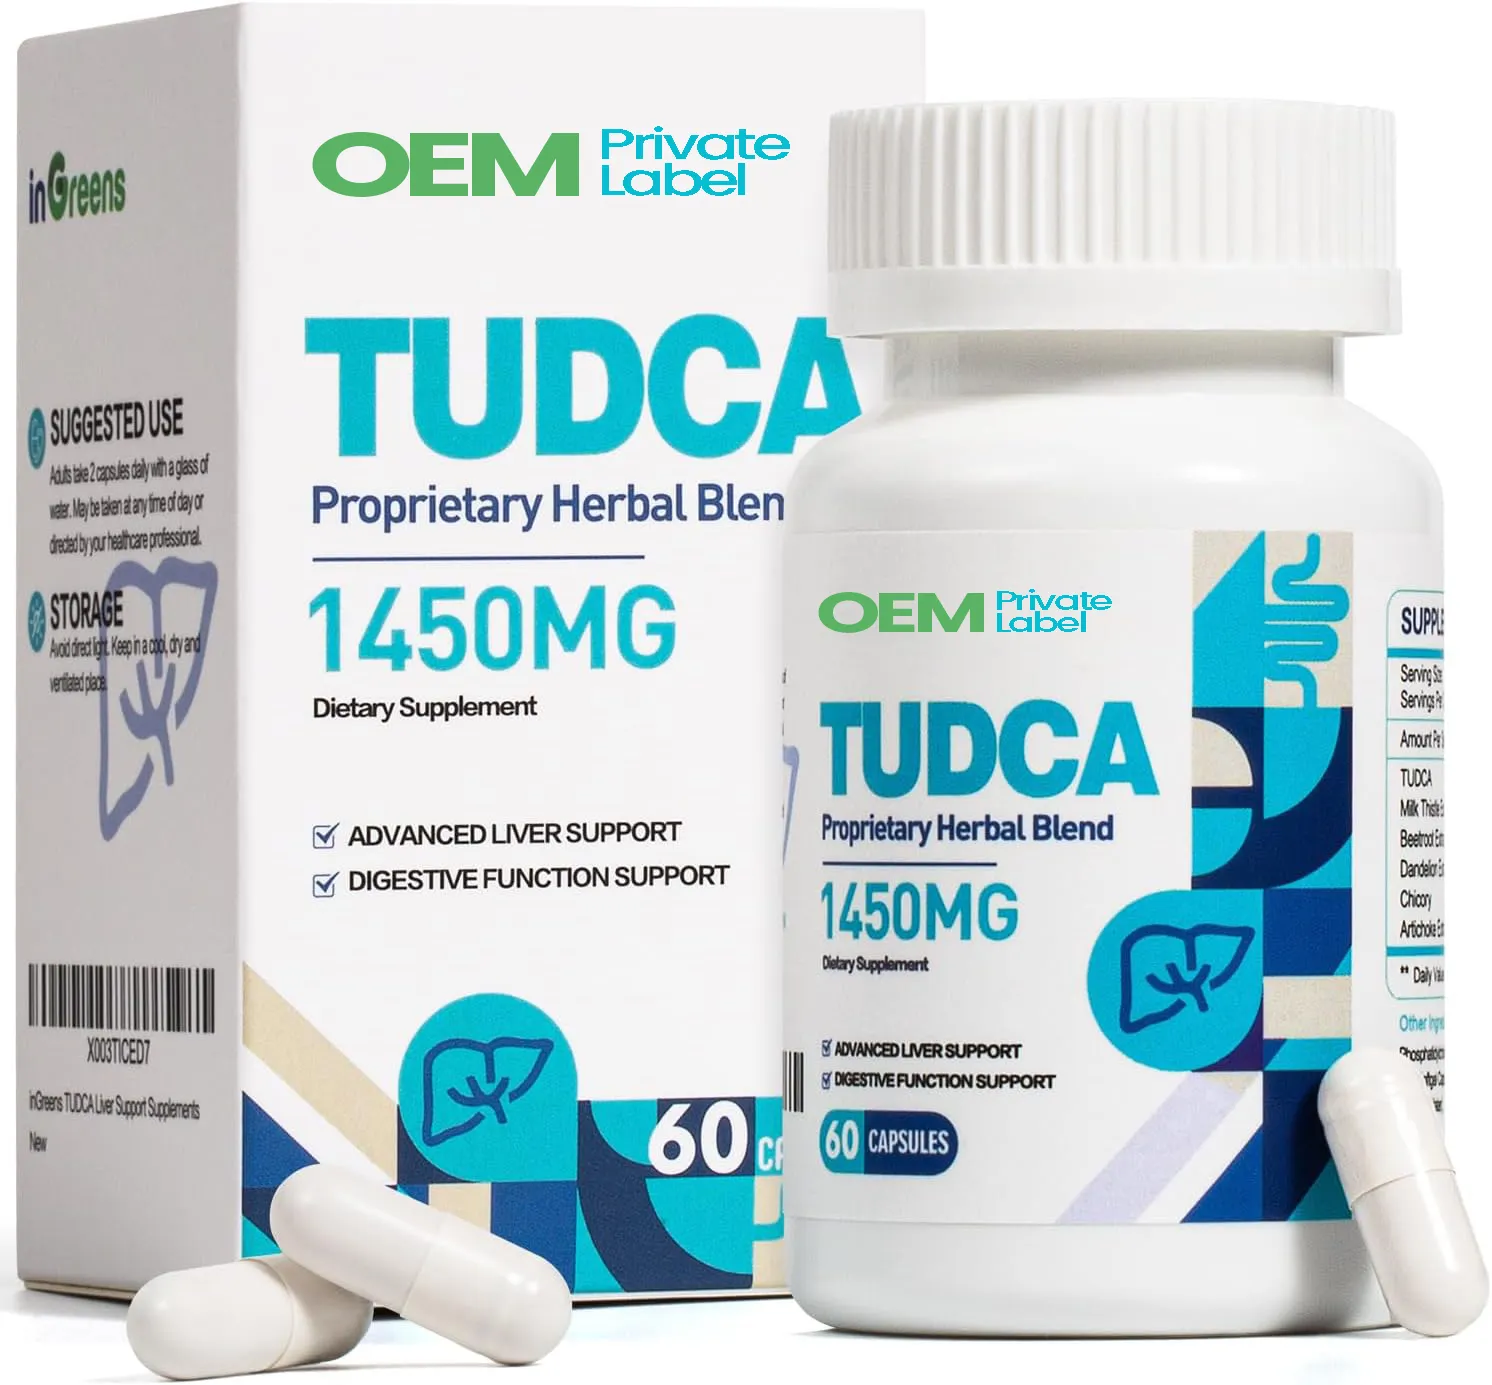 cGMP Factory OEM Private Label Liver Support Supplement 1450mg Tauroursodeoxycholic Acid Tudca Capsules